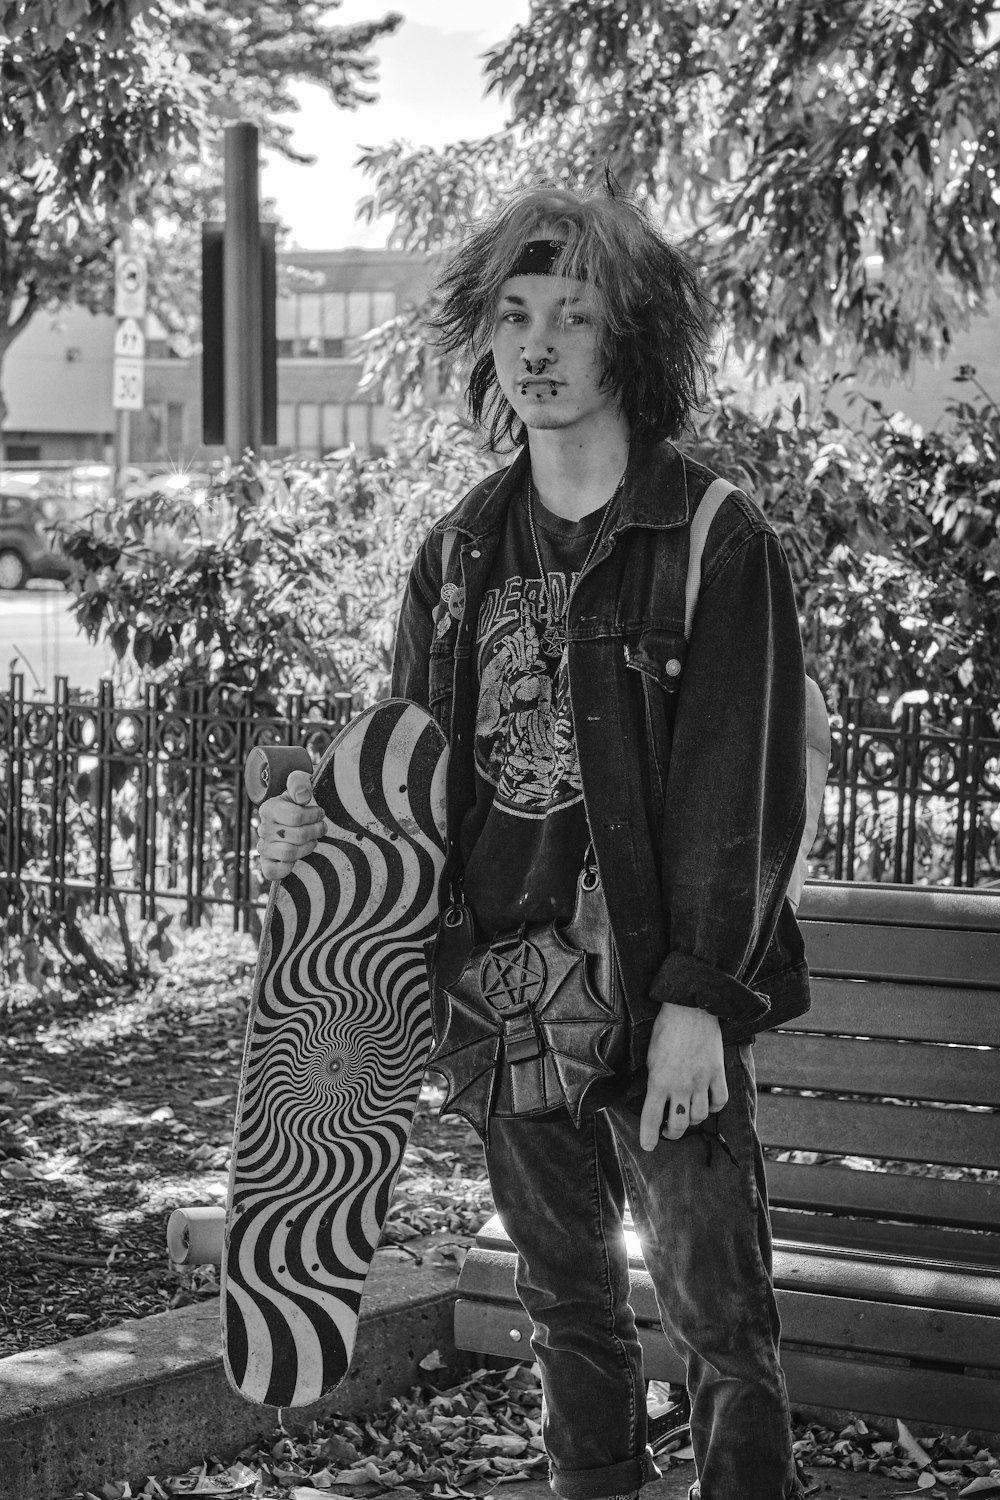 a young man holding a skateboard next to a park bench